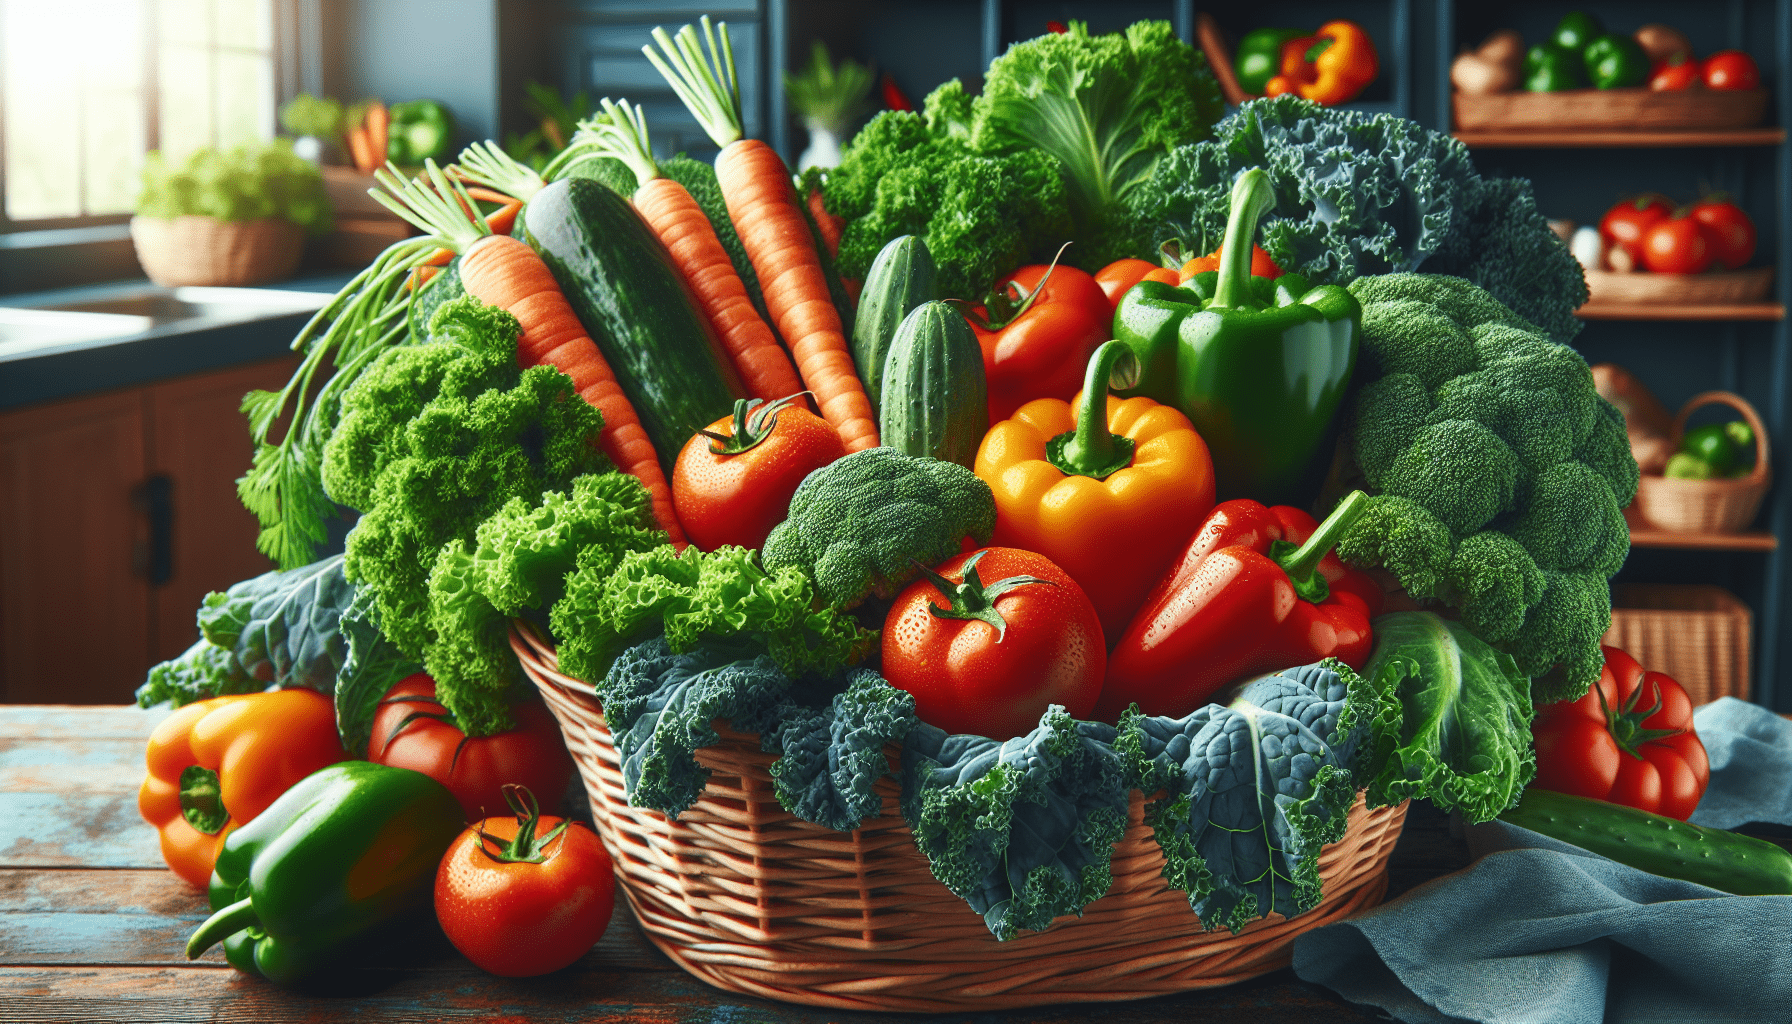 Can Organic Food Help with Weight Loss